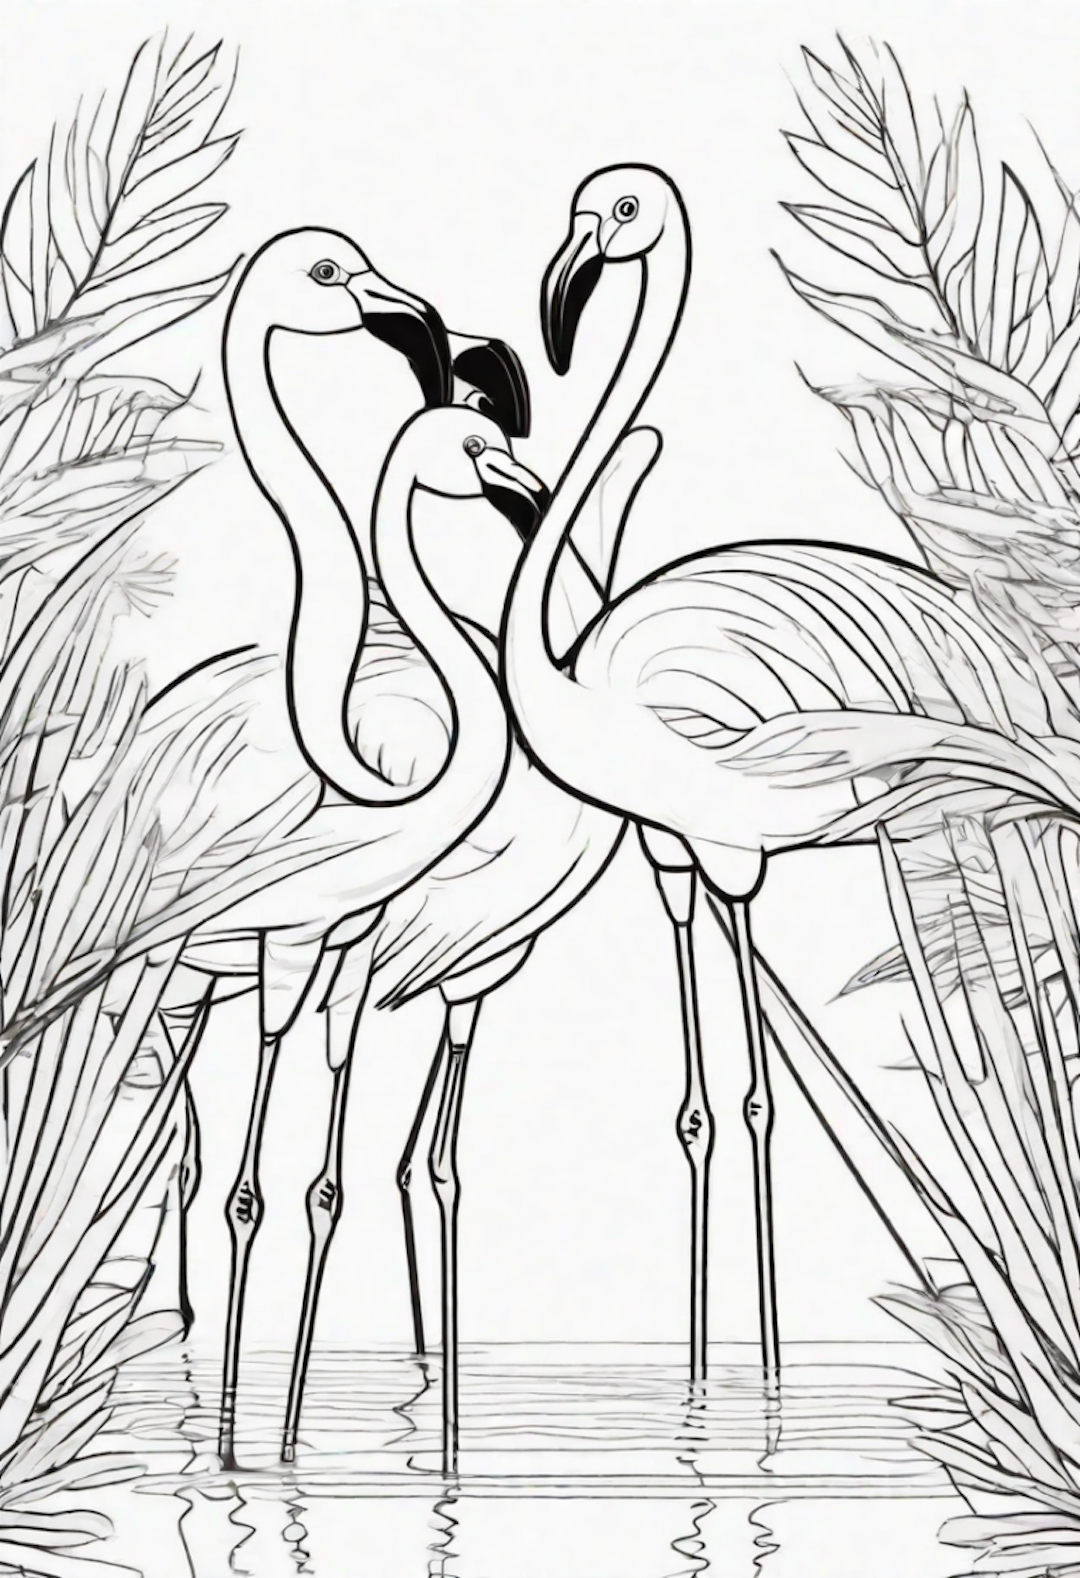 Flamingos by the Water coloring pages